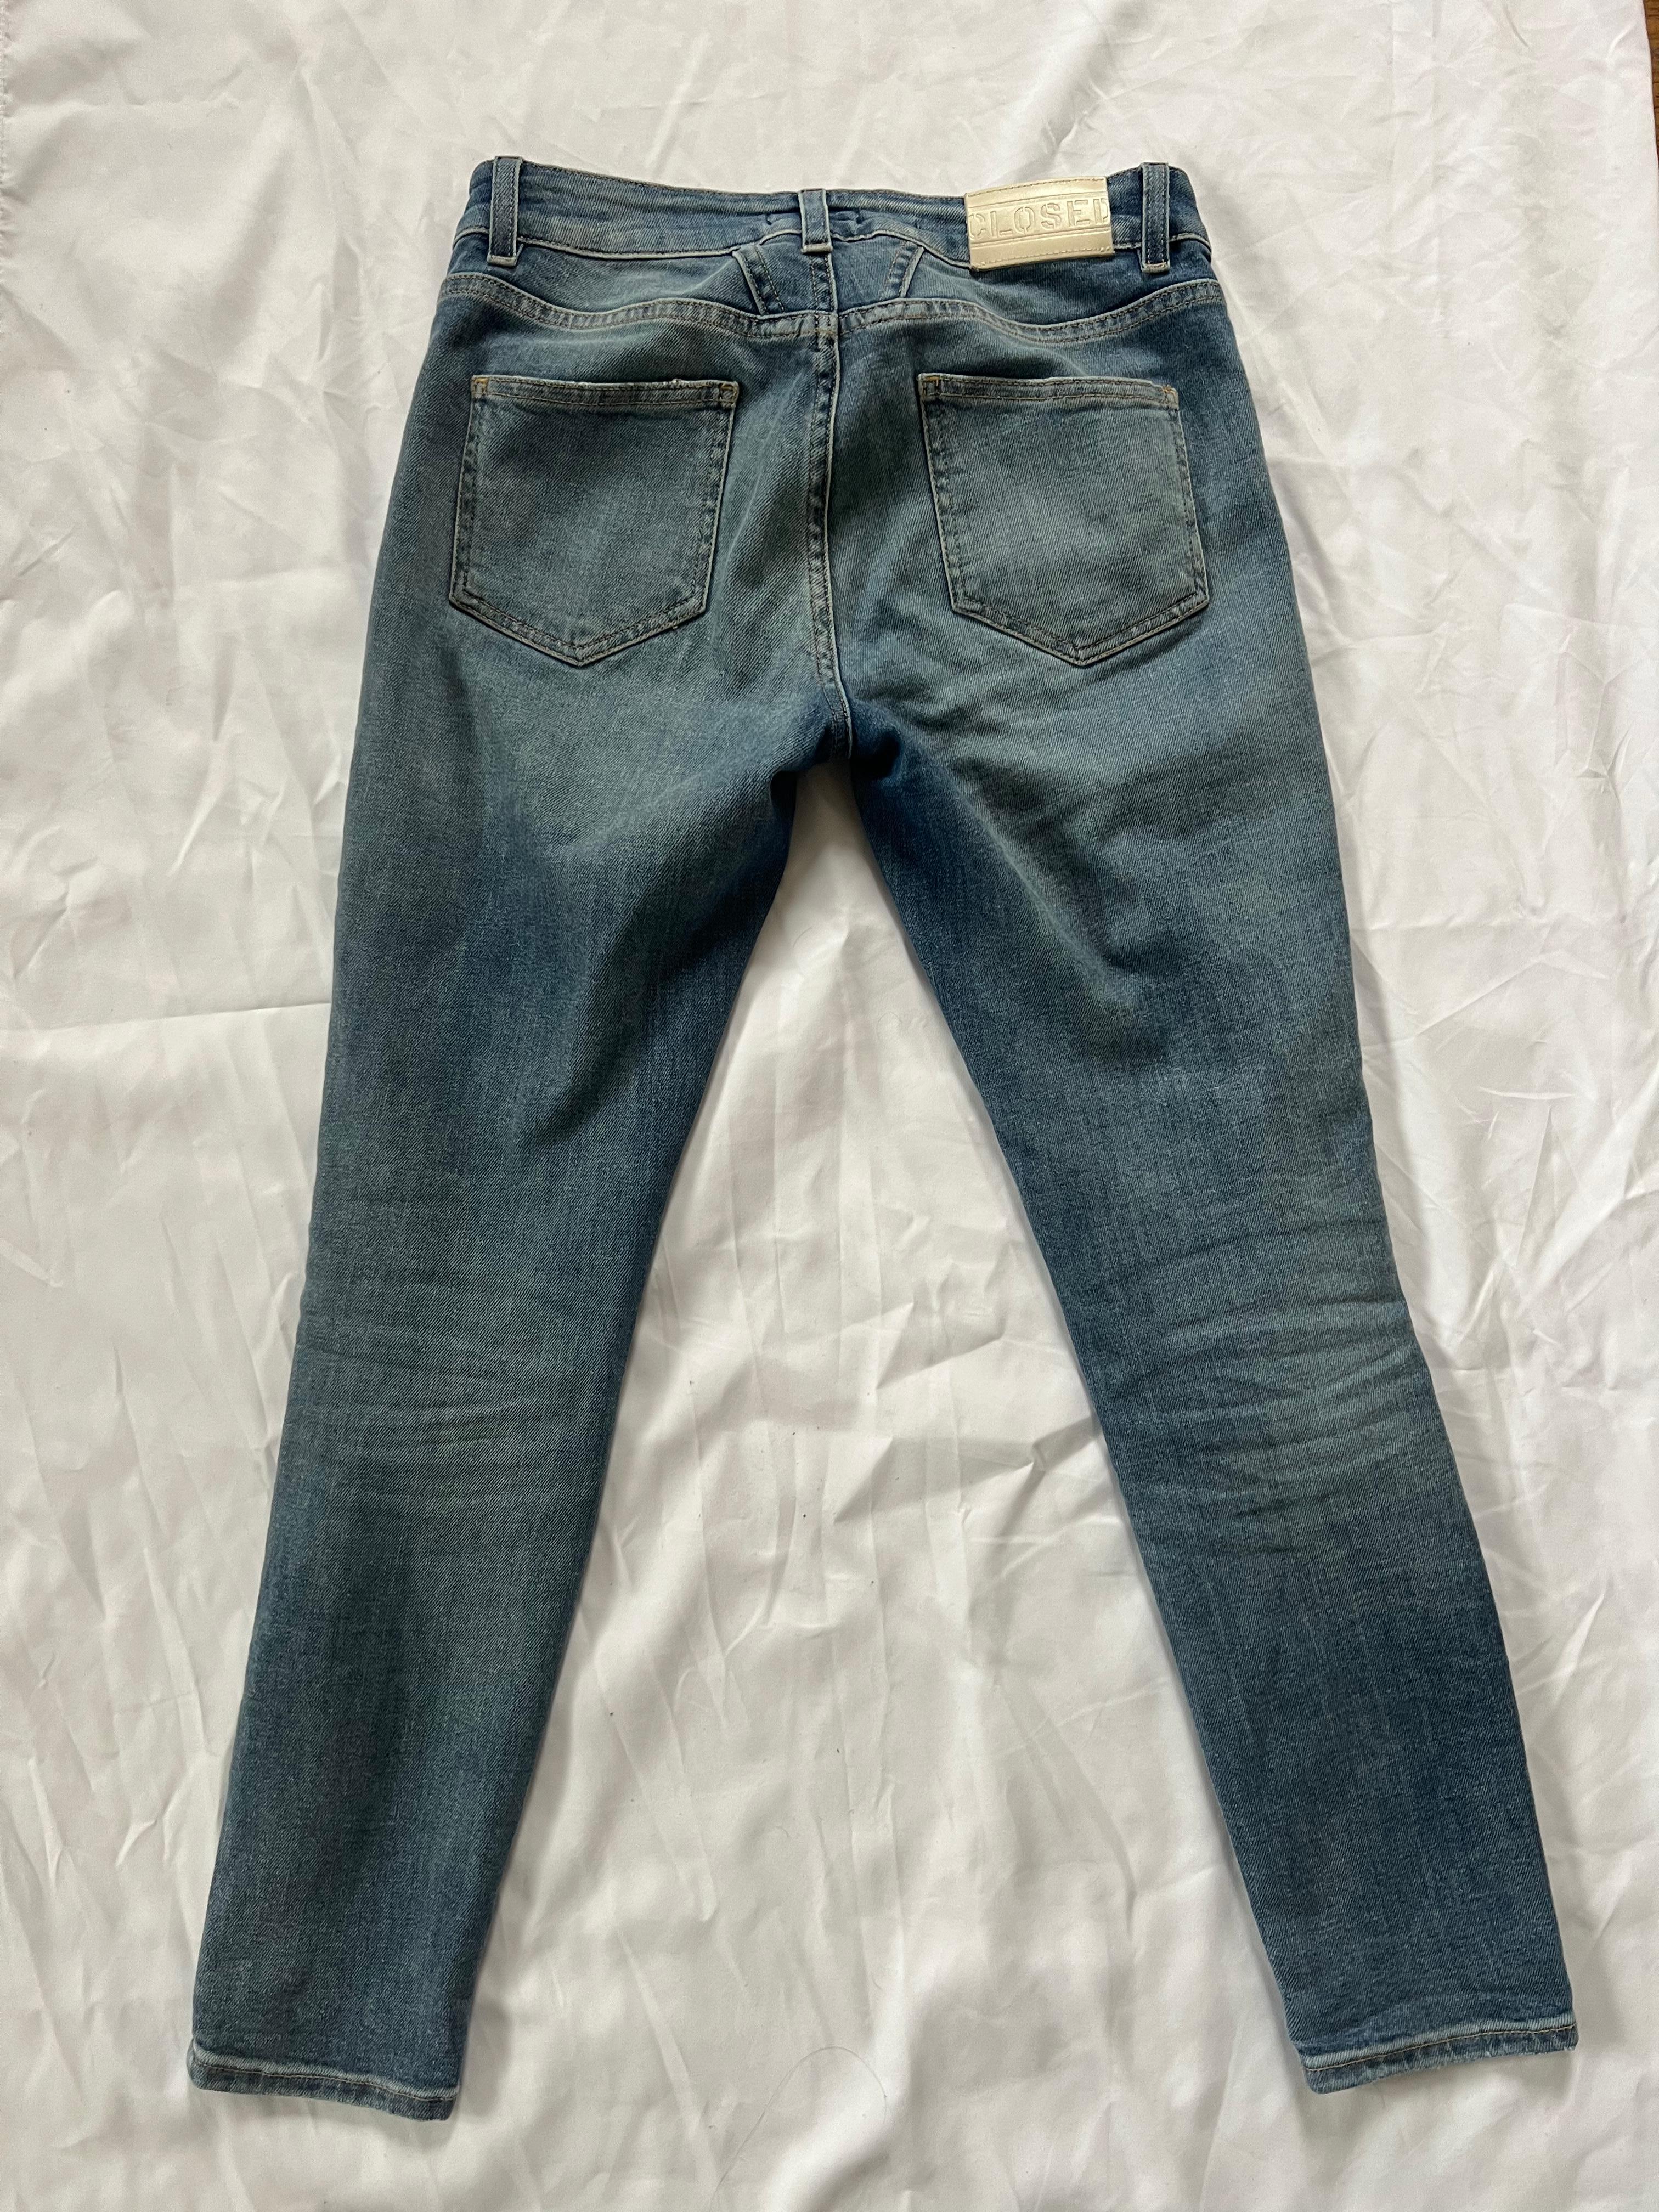 Closed Baker Blue Jeans Pants, Size 26 In Excellent Condition For Sale In Beverly Hills, CA